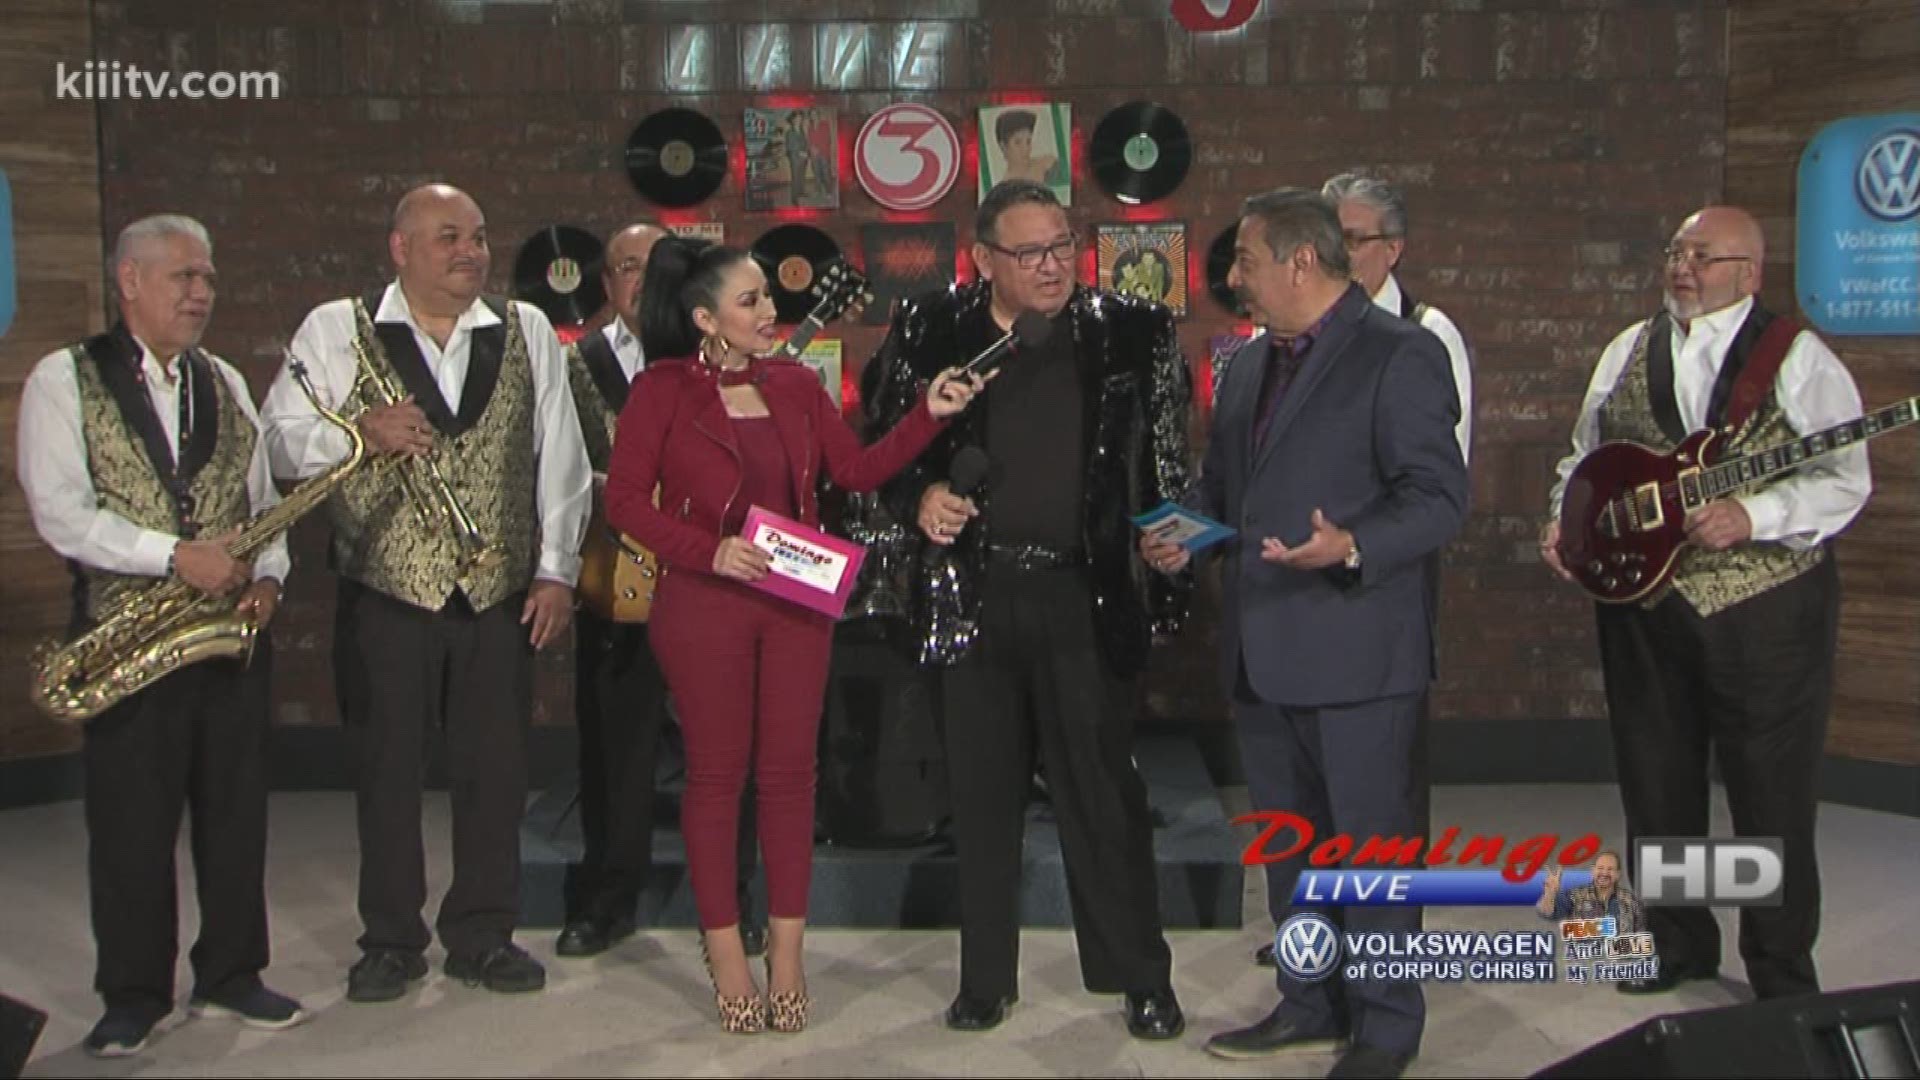 Michael B & The Fabulous Flames Interviewing with Barbi Leo and Rudy Trevino on Domingo Live.